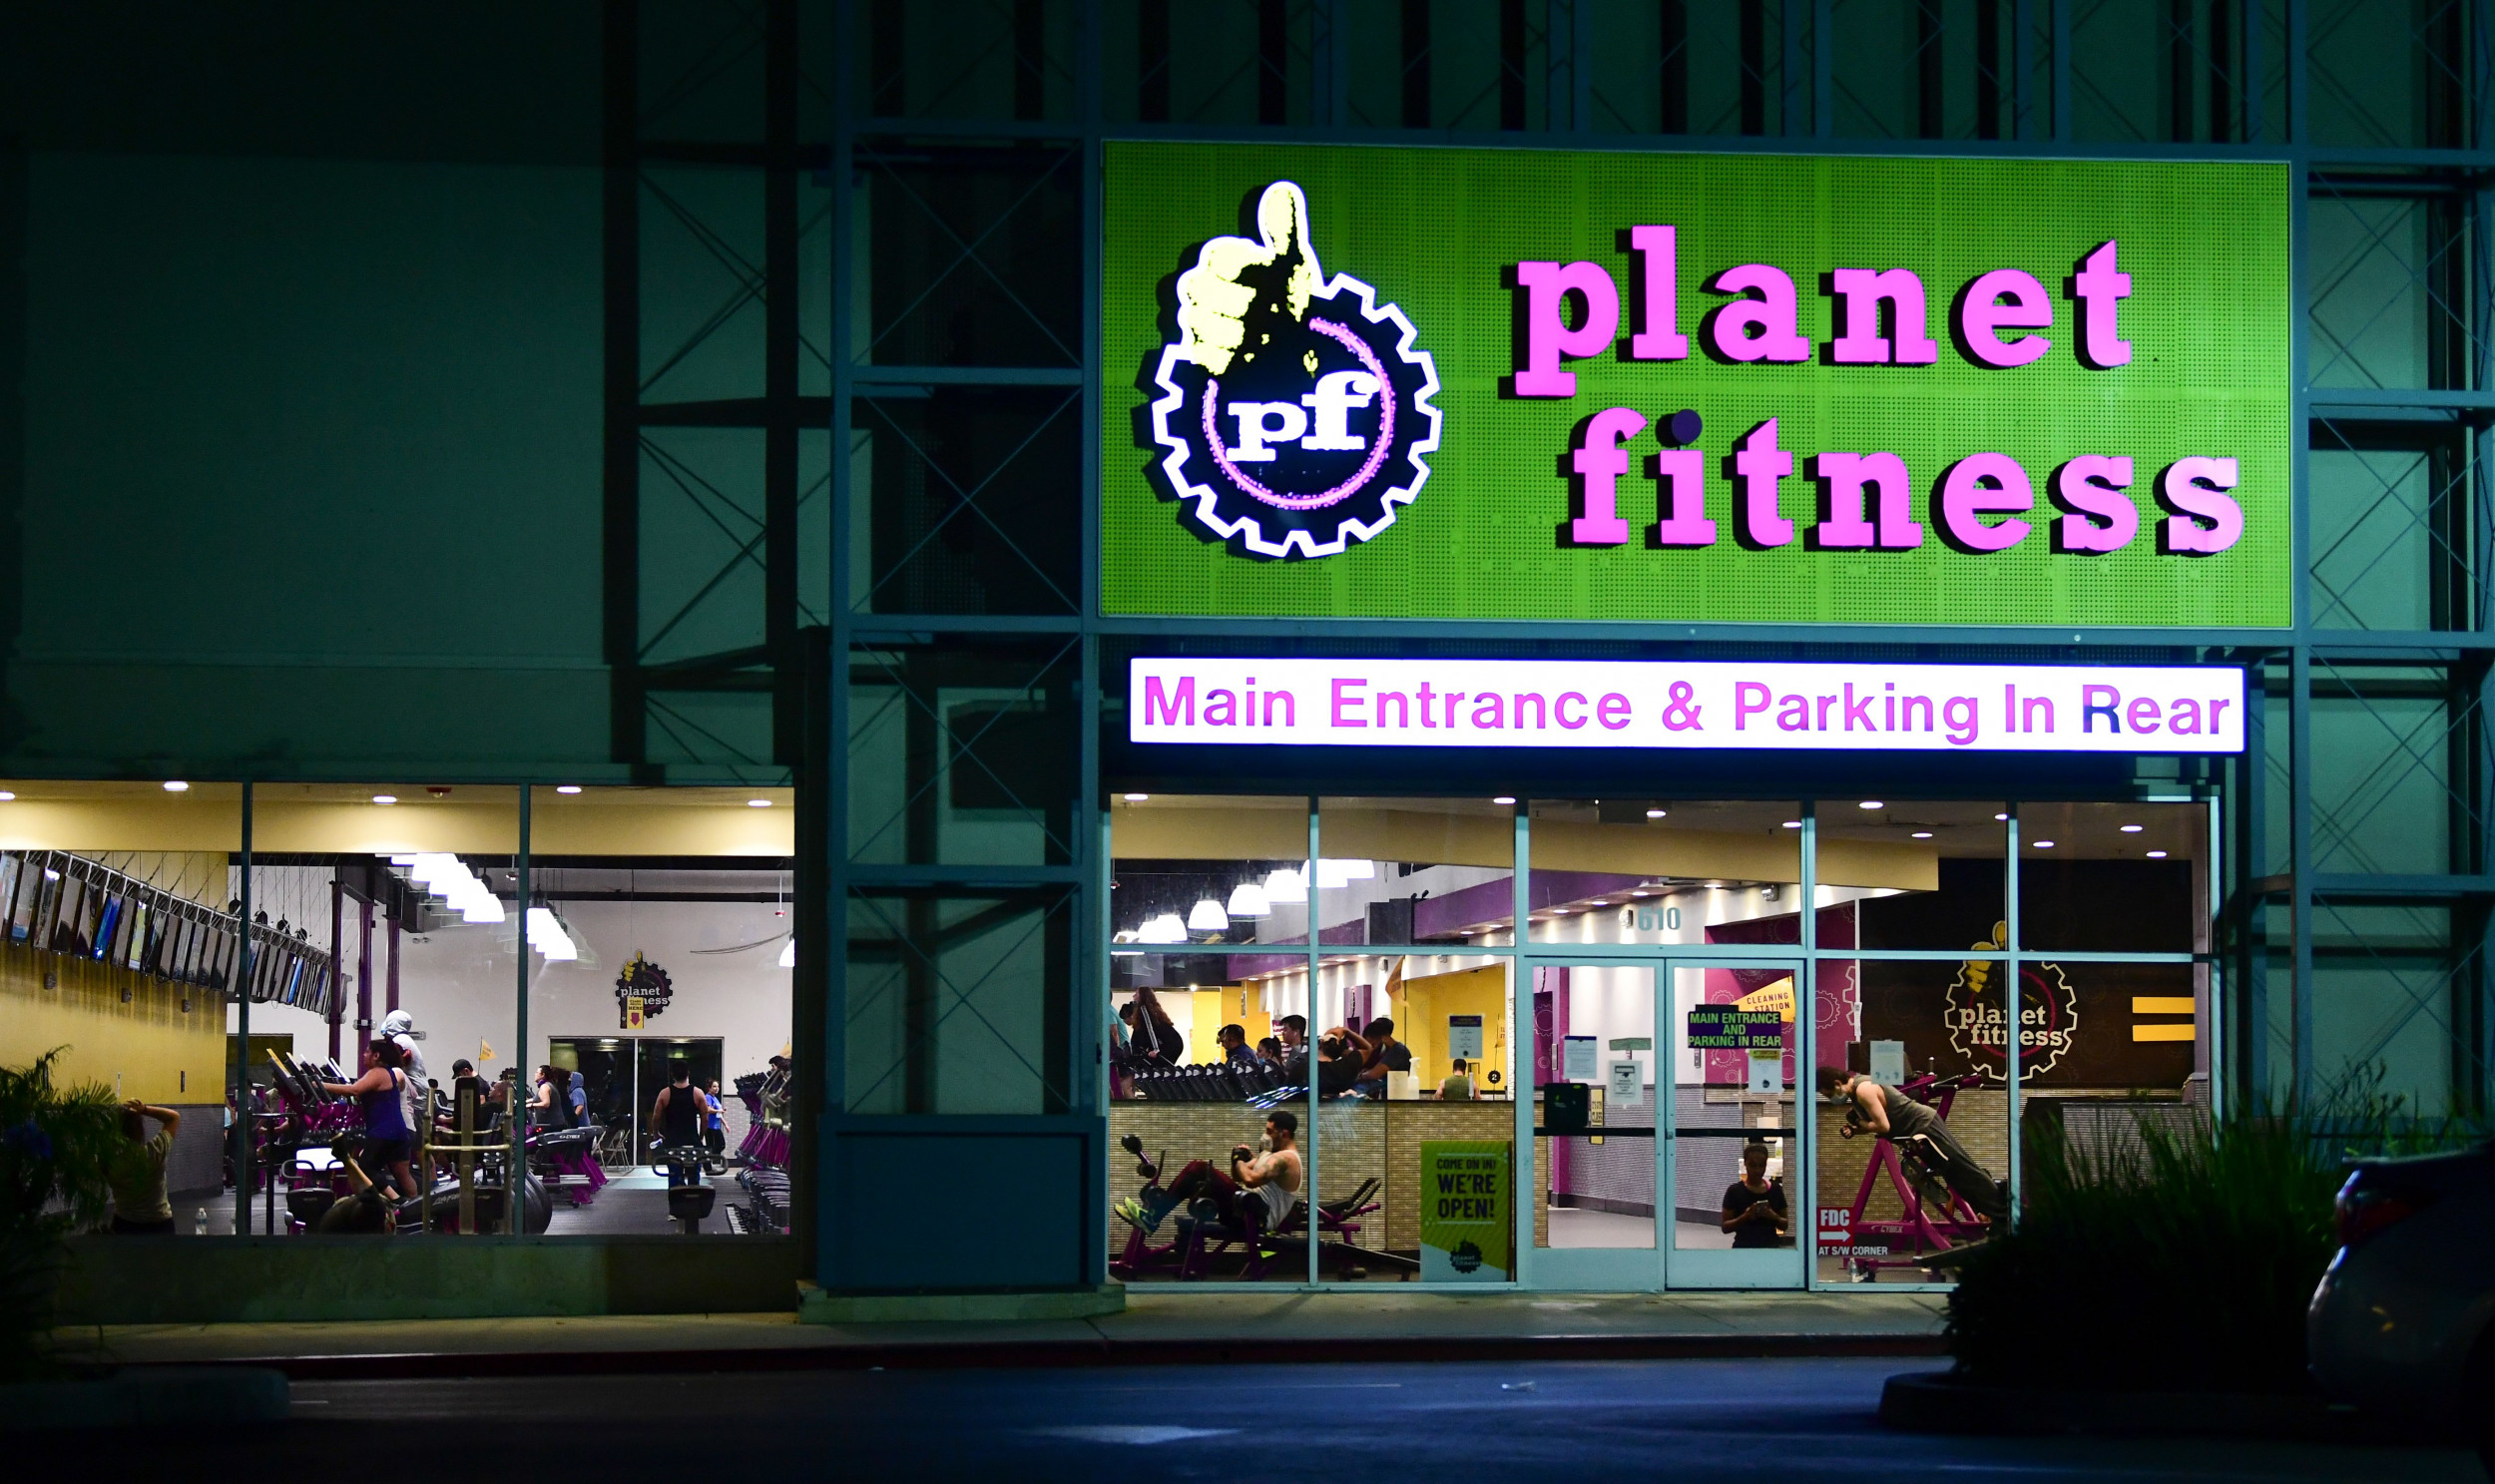 nearest planet fitness from my location